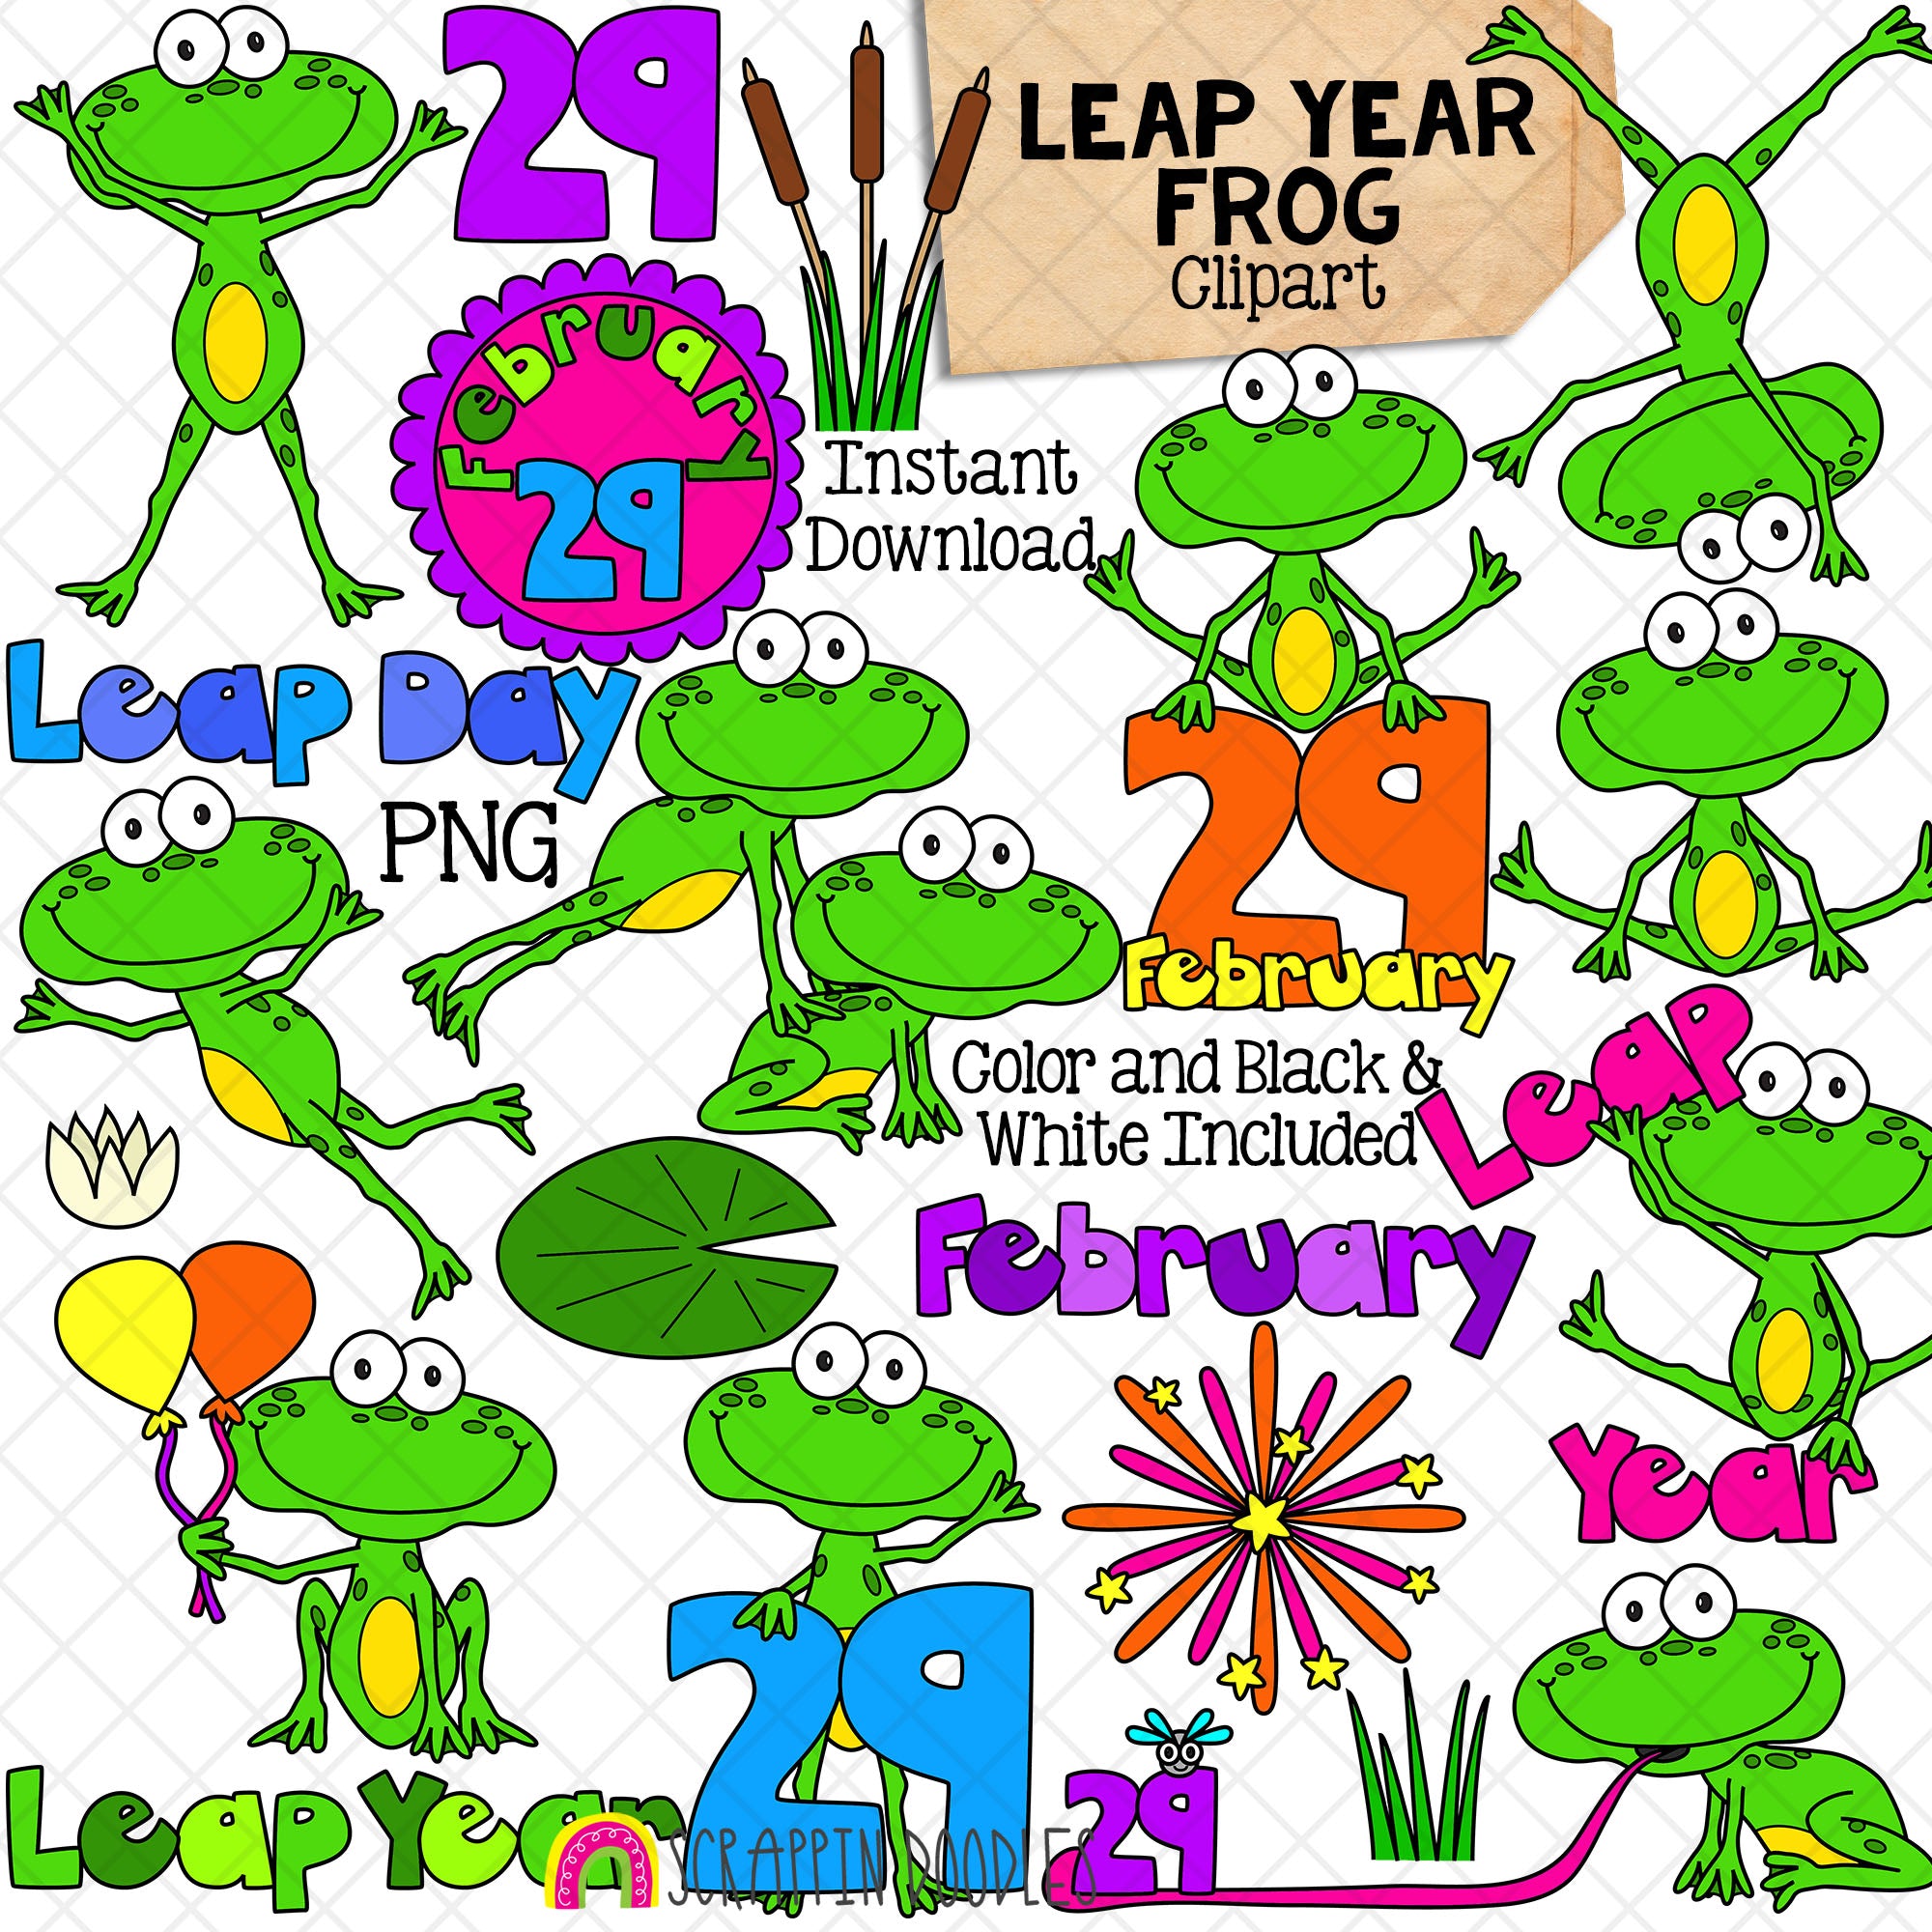 Leap Year Clip Art - Leap Day Frog Clipart - February 29th